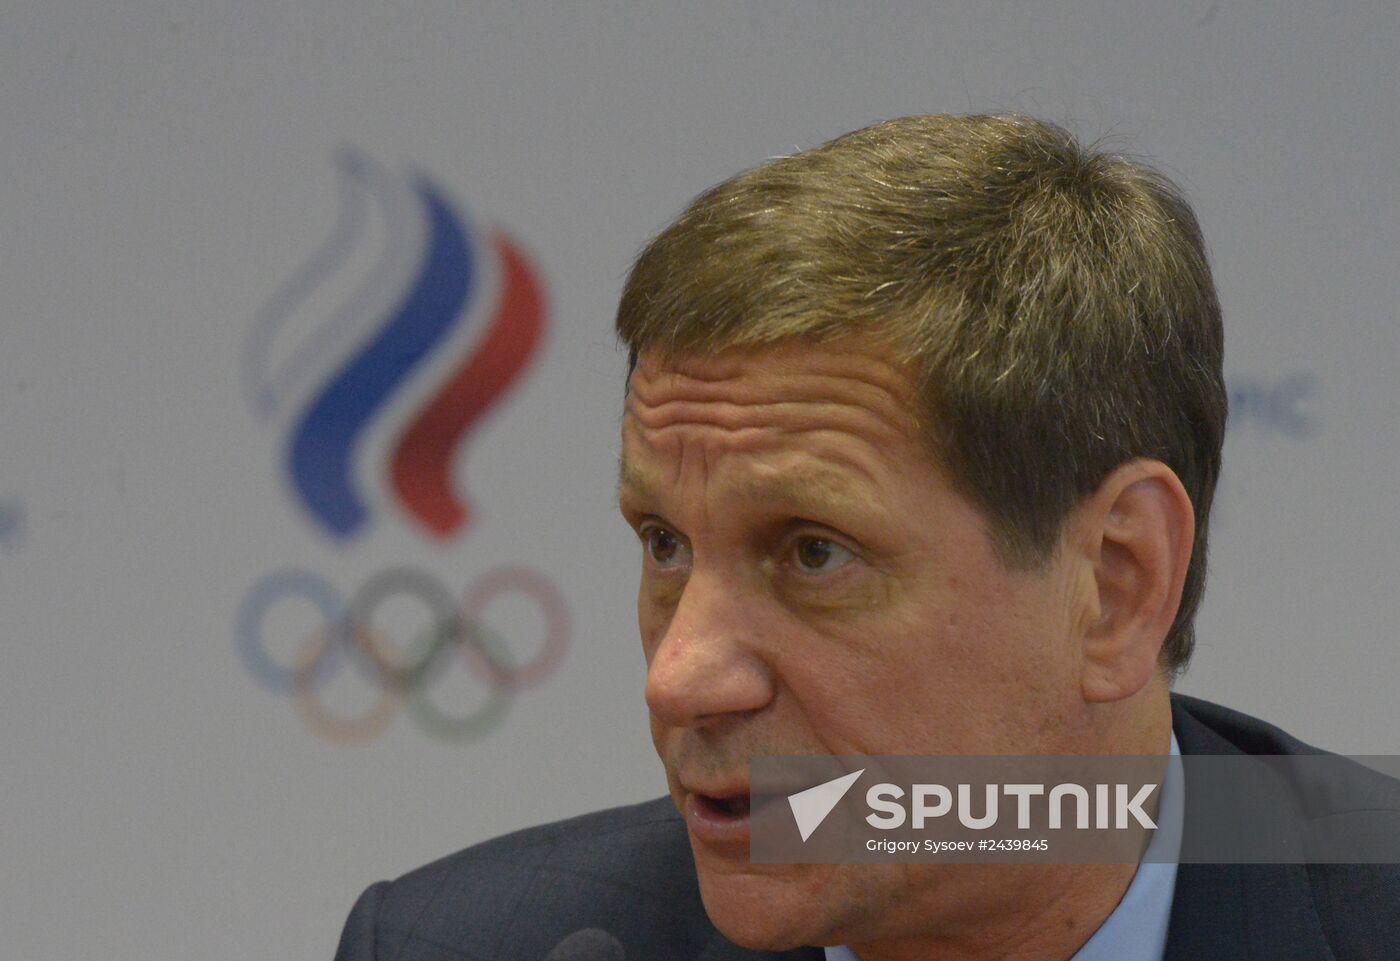 Elections of the President of the Russian Olympic Committee